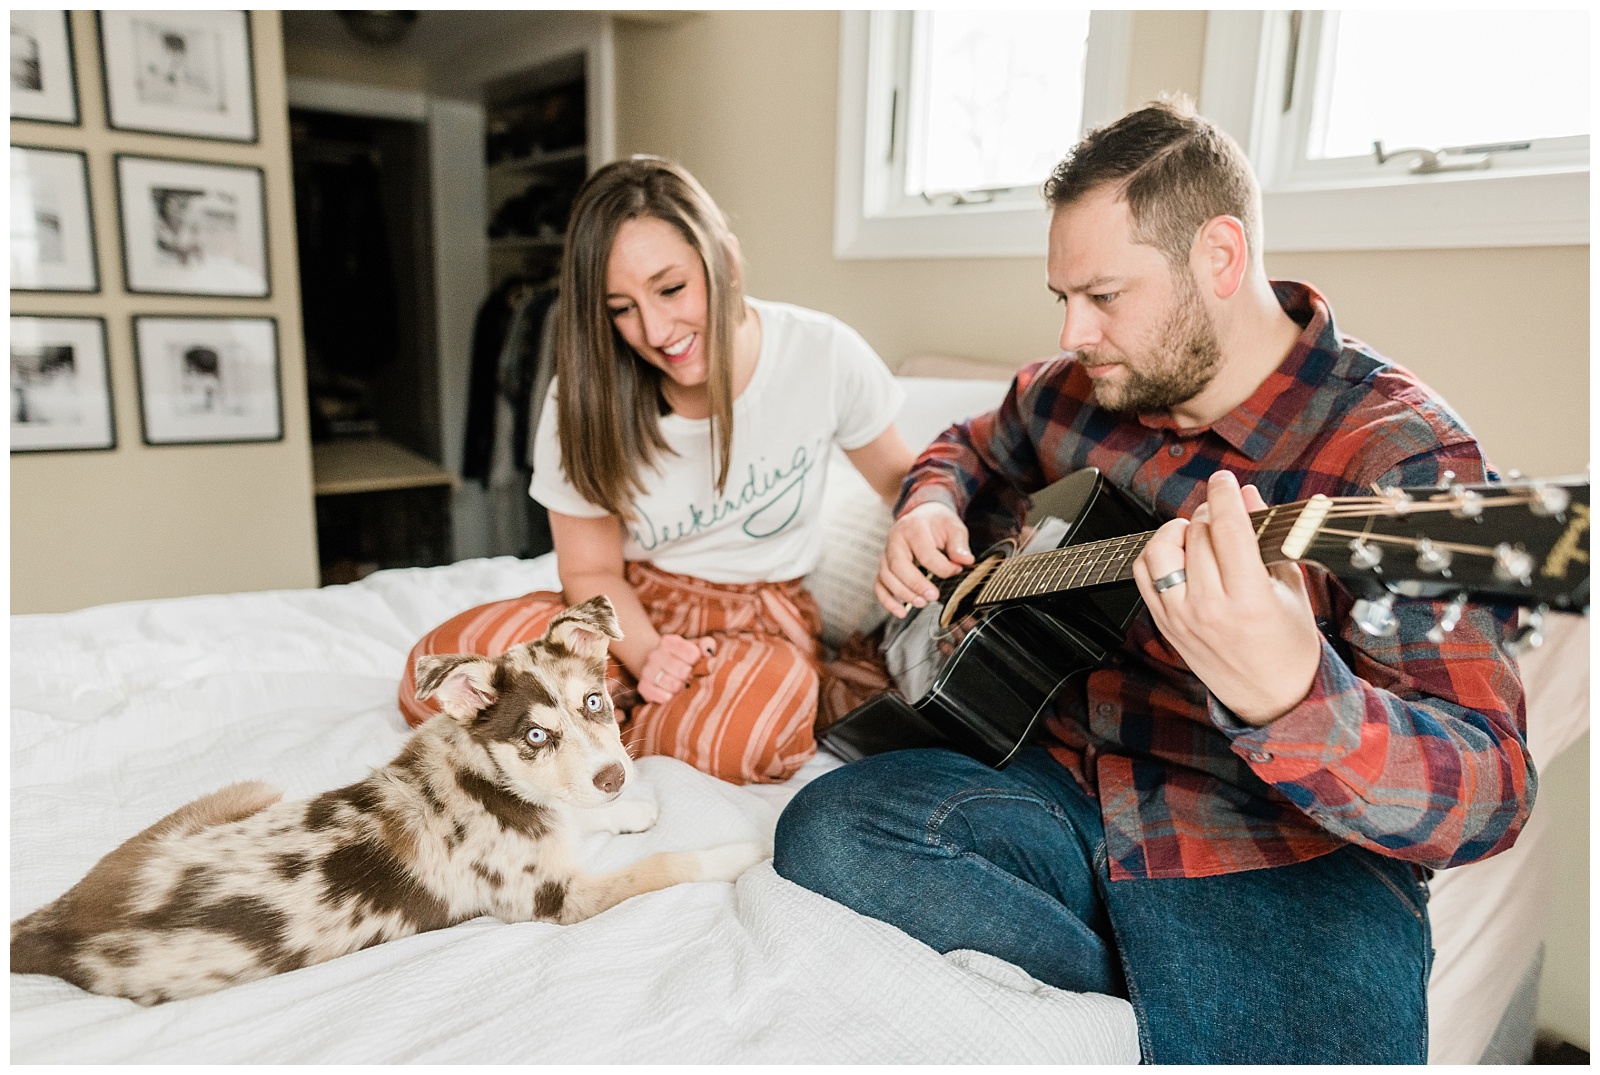 In home photo session, new puppy, casual, weekend, new jersey lifestyle, natural light photographer, guitar